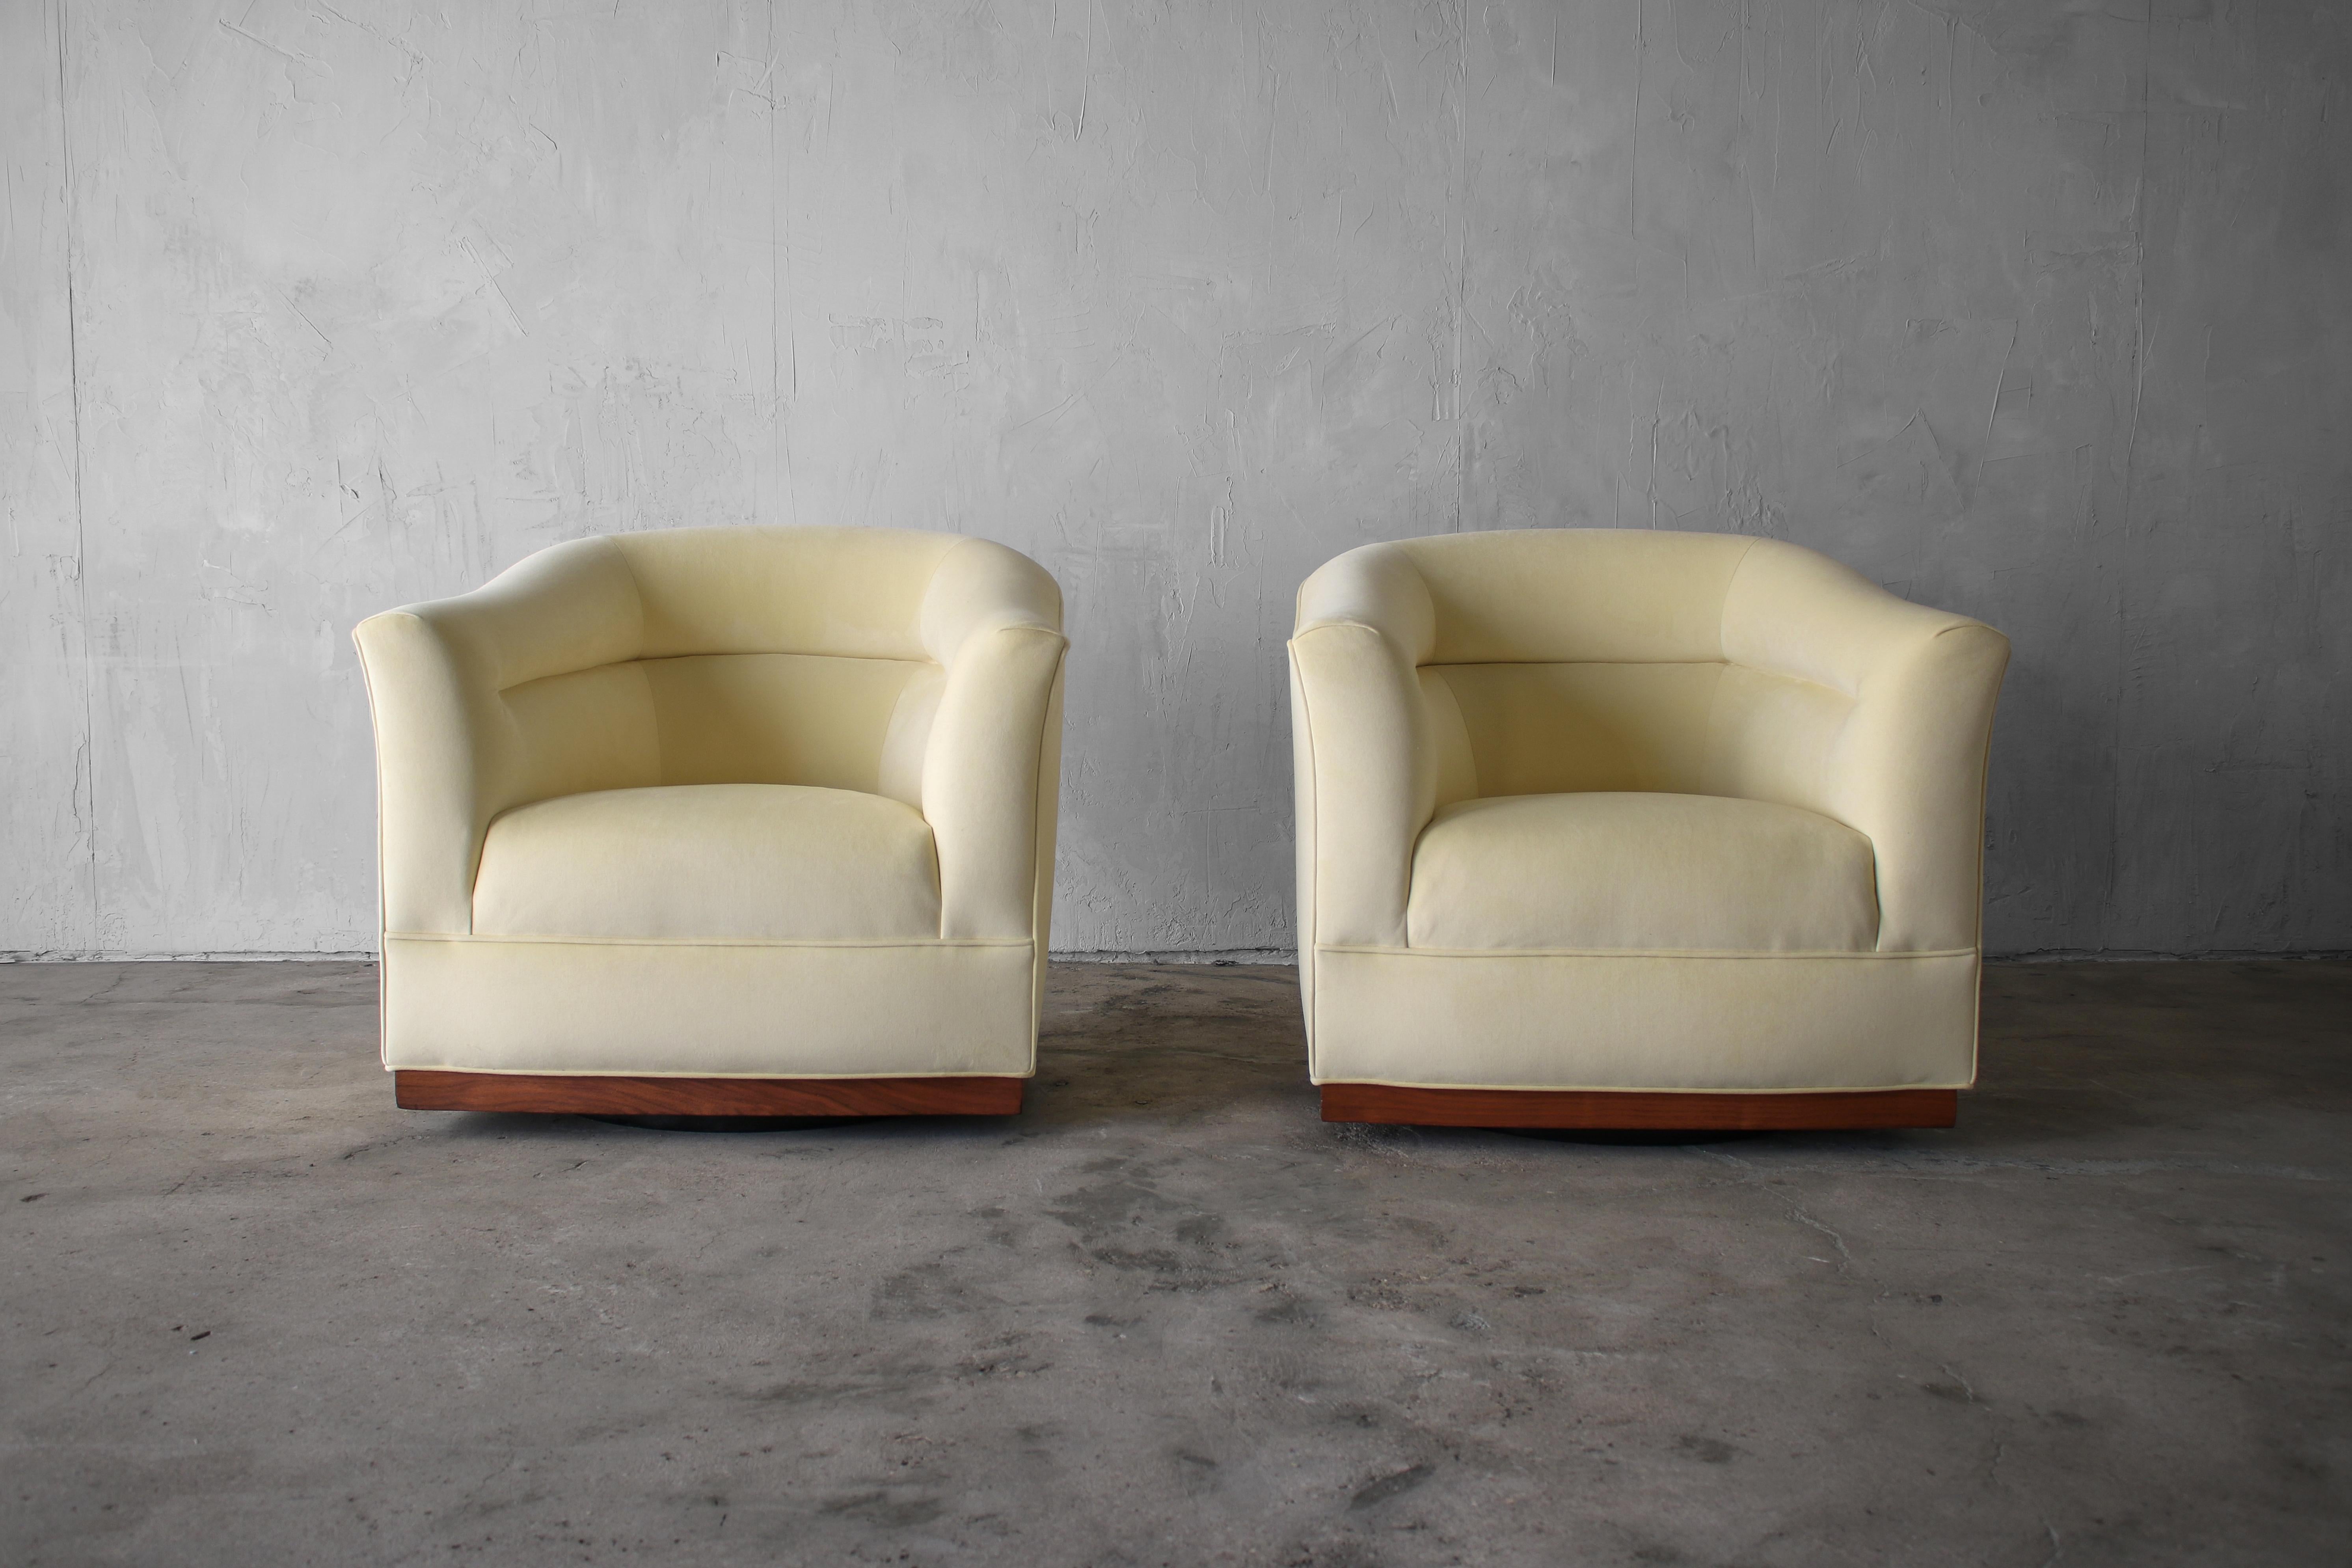 This is a beautiful, large pair of barrel back swivel chairs with walnut trim and plinth swivel bases. This pair has beautiful lines that can be appreciated from almost any angle. 

The chairs have been professionally reupholstered with all new